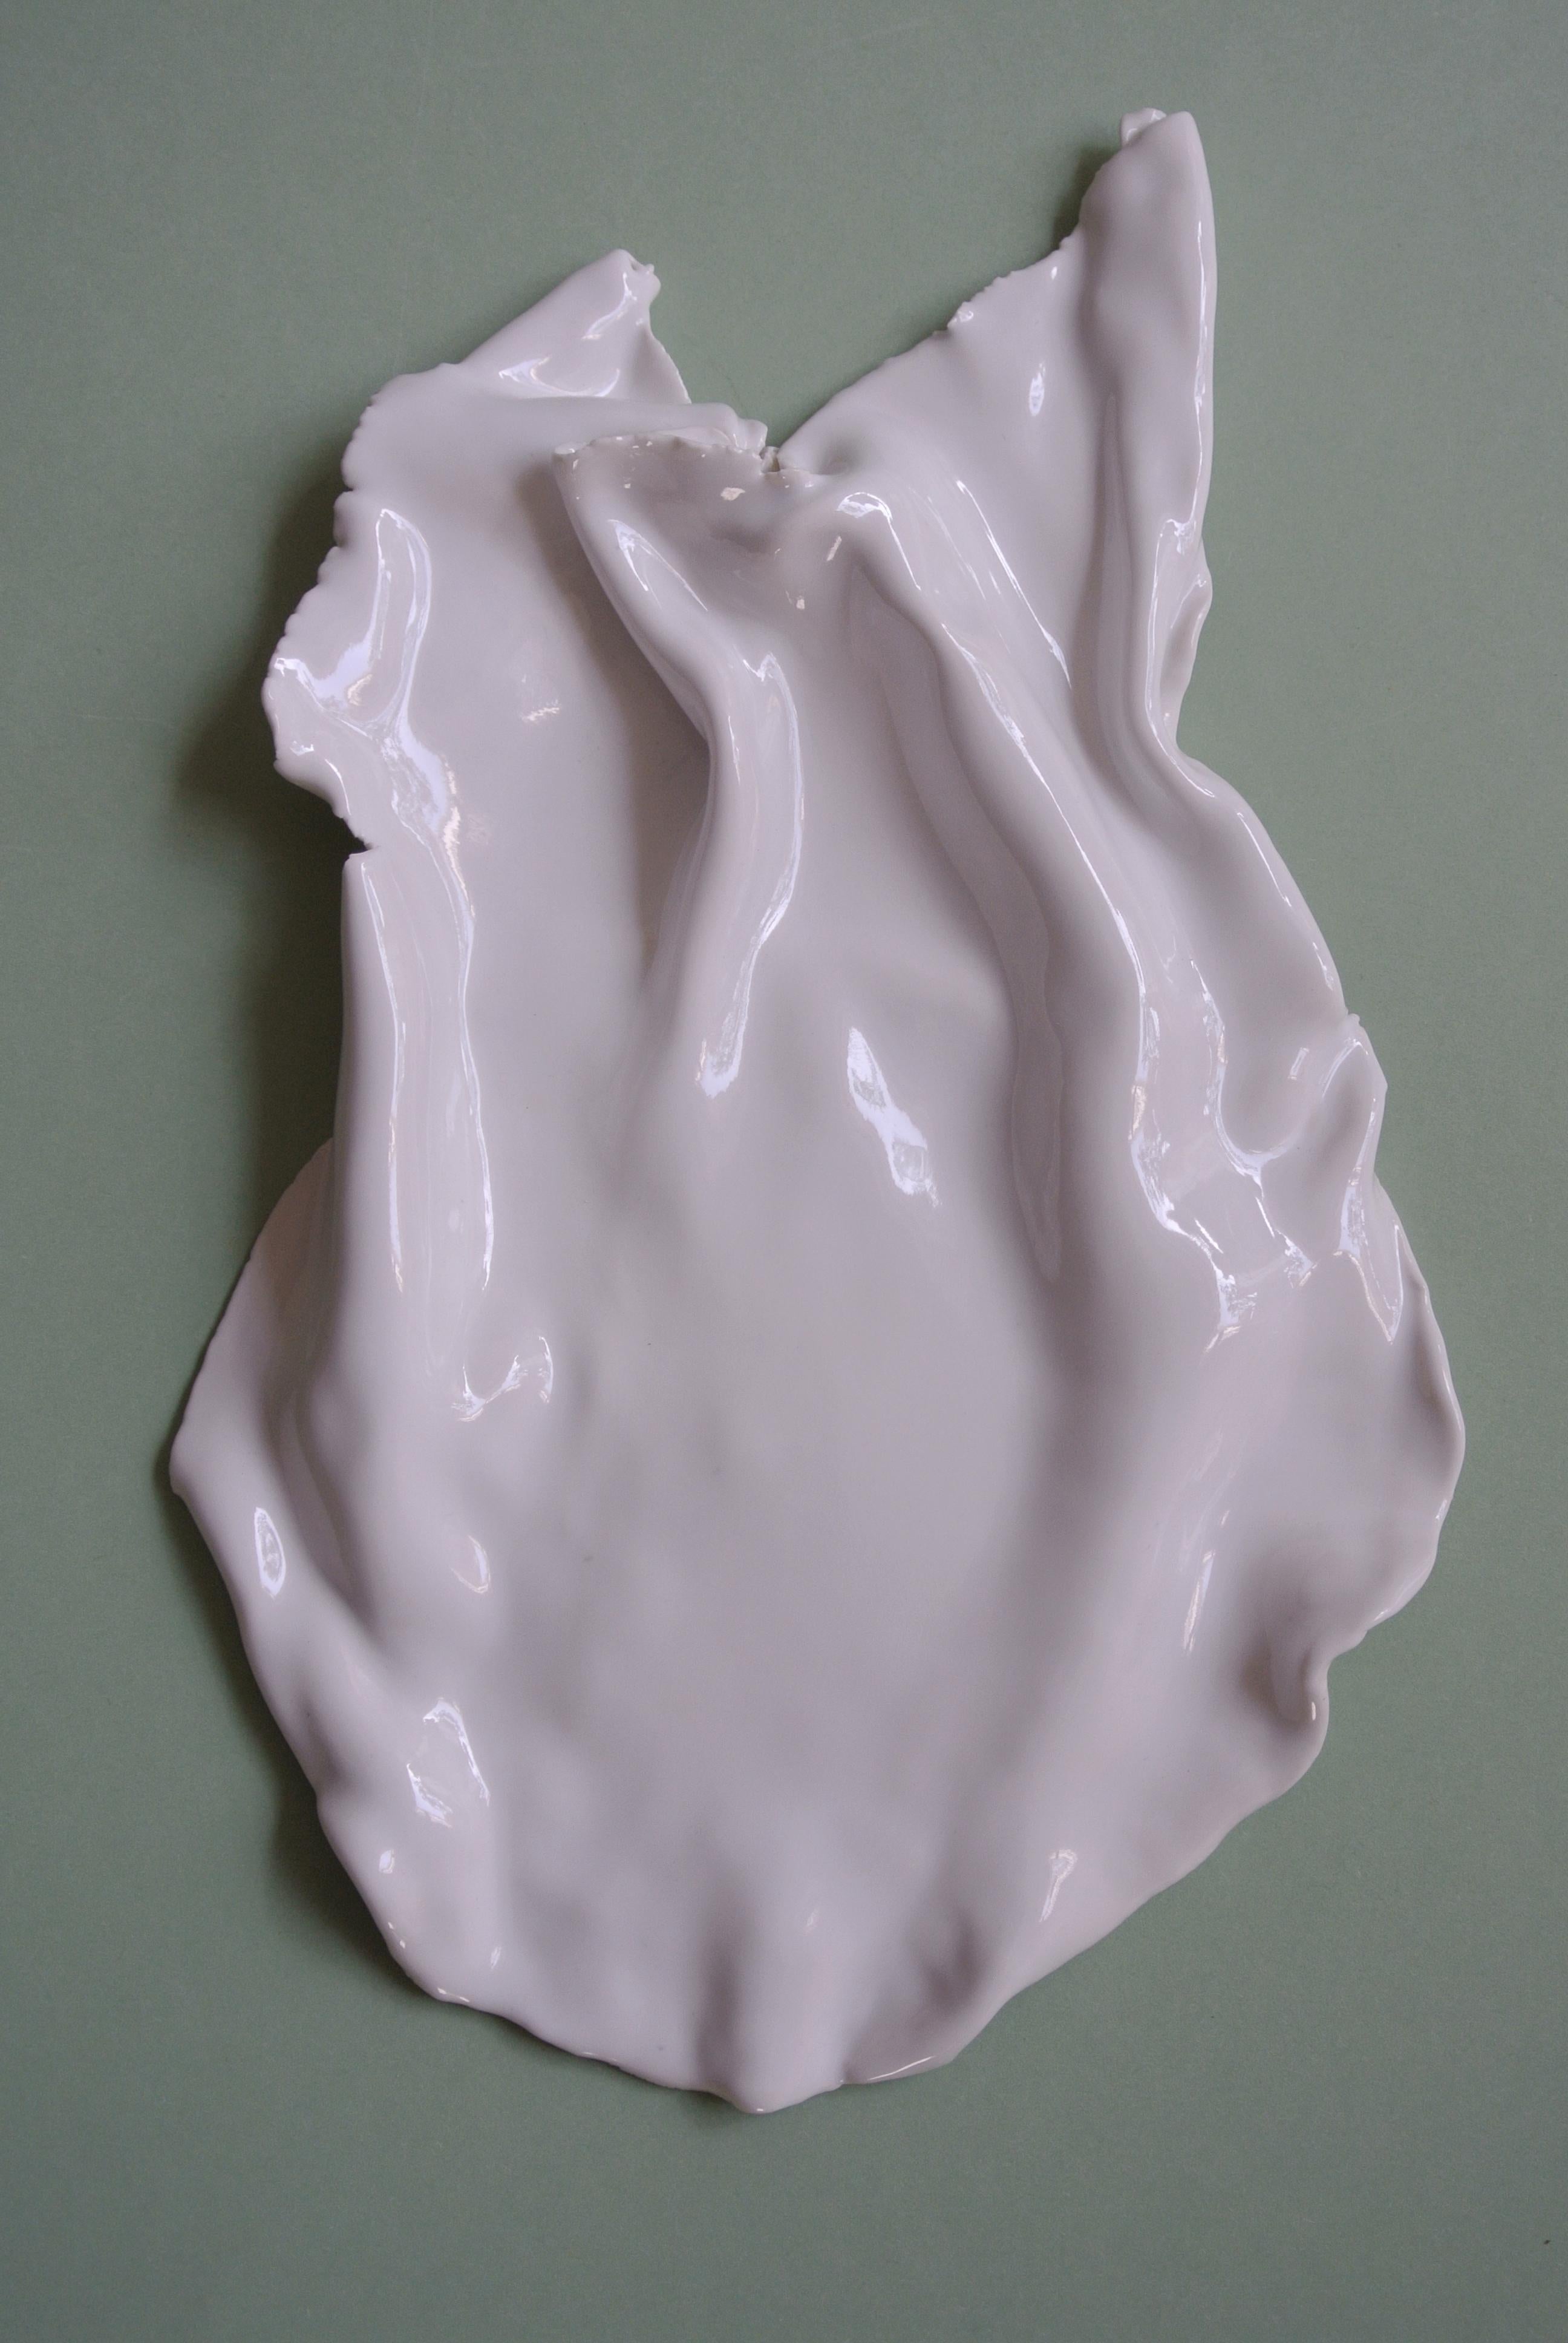 Thin porcelain object with glossy white glaze in an
asymmetric and uneven shape. Glazed only on the surface. 
Part of an ongoing series of one off porcelain paper weights.
      